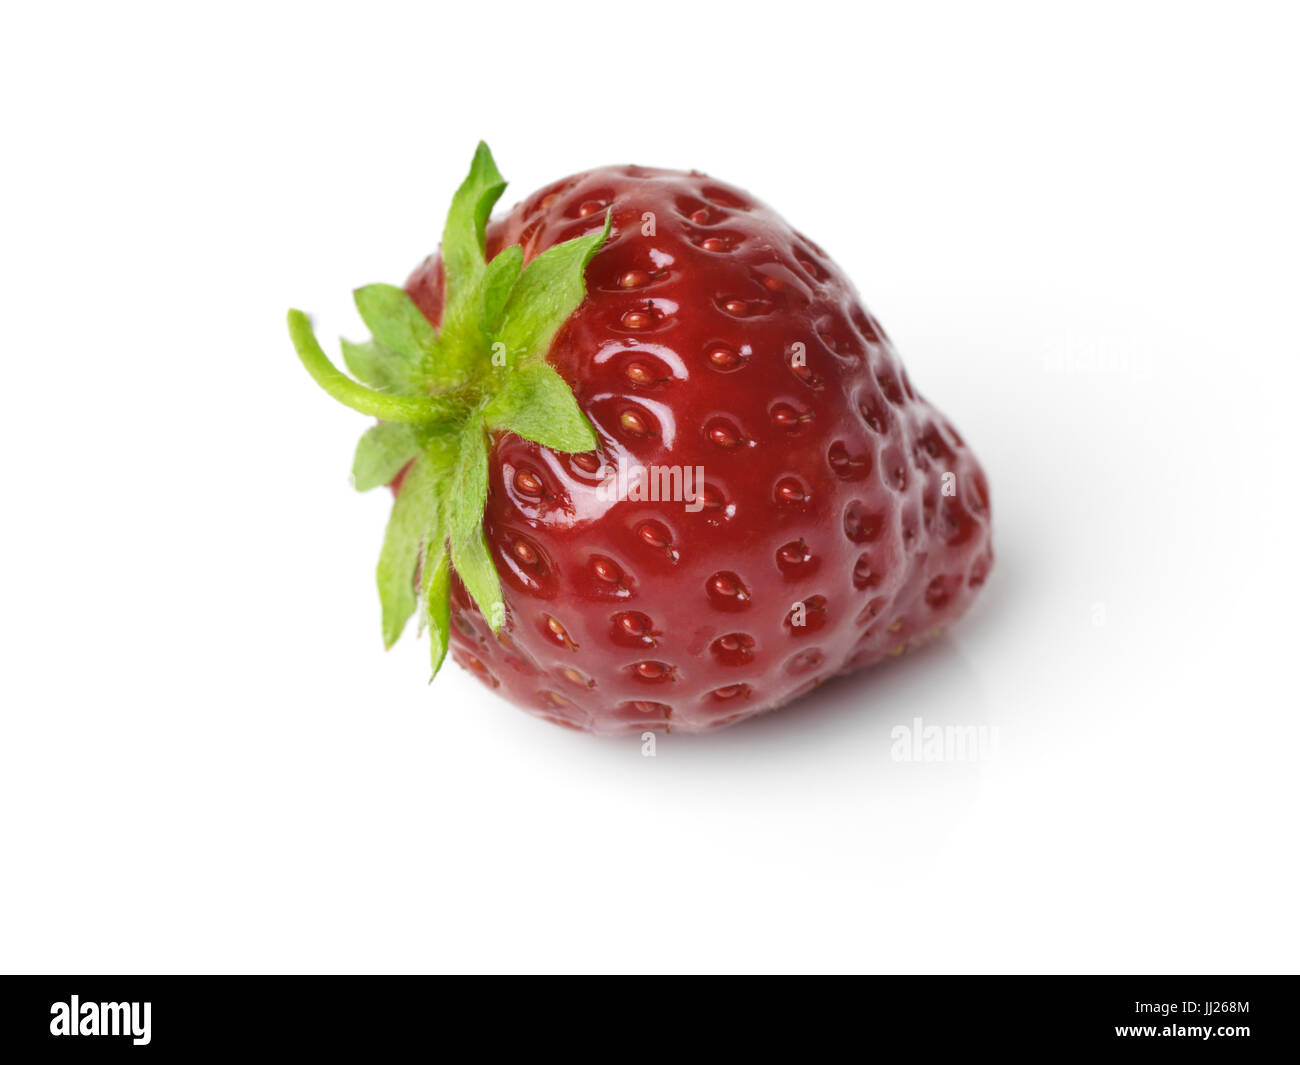 Red organic freshly picked homegrown strawberry isolated on white background Stock Photo